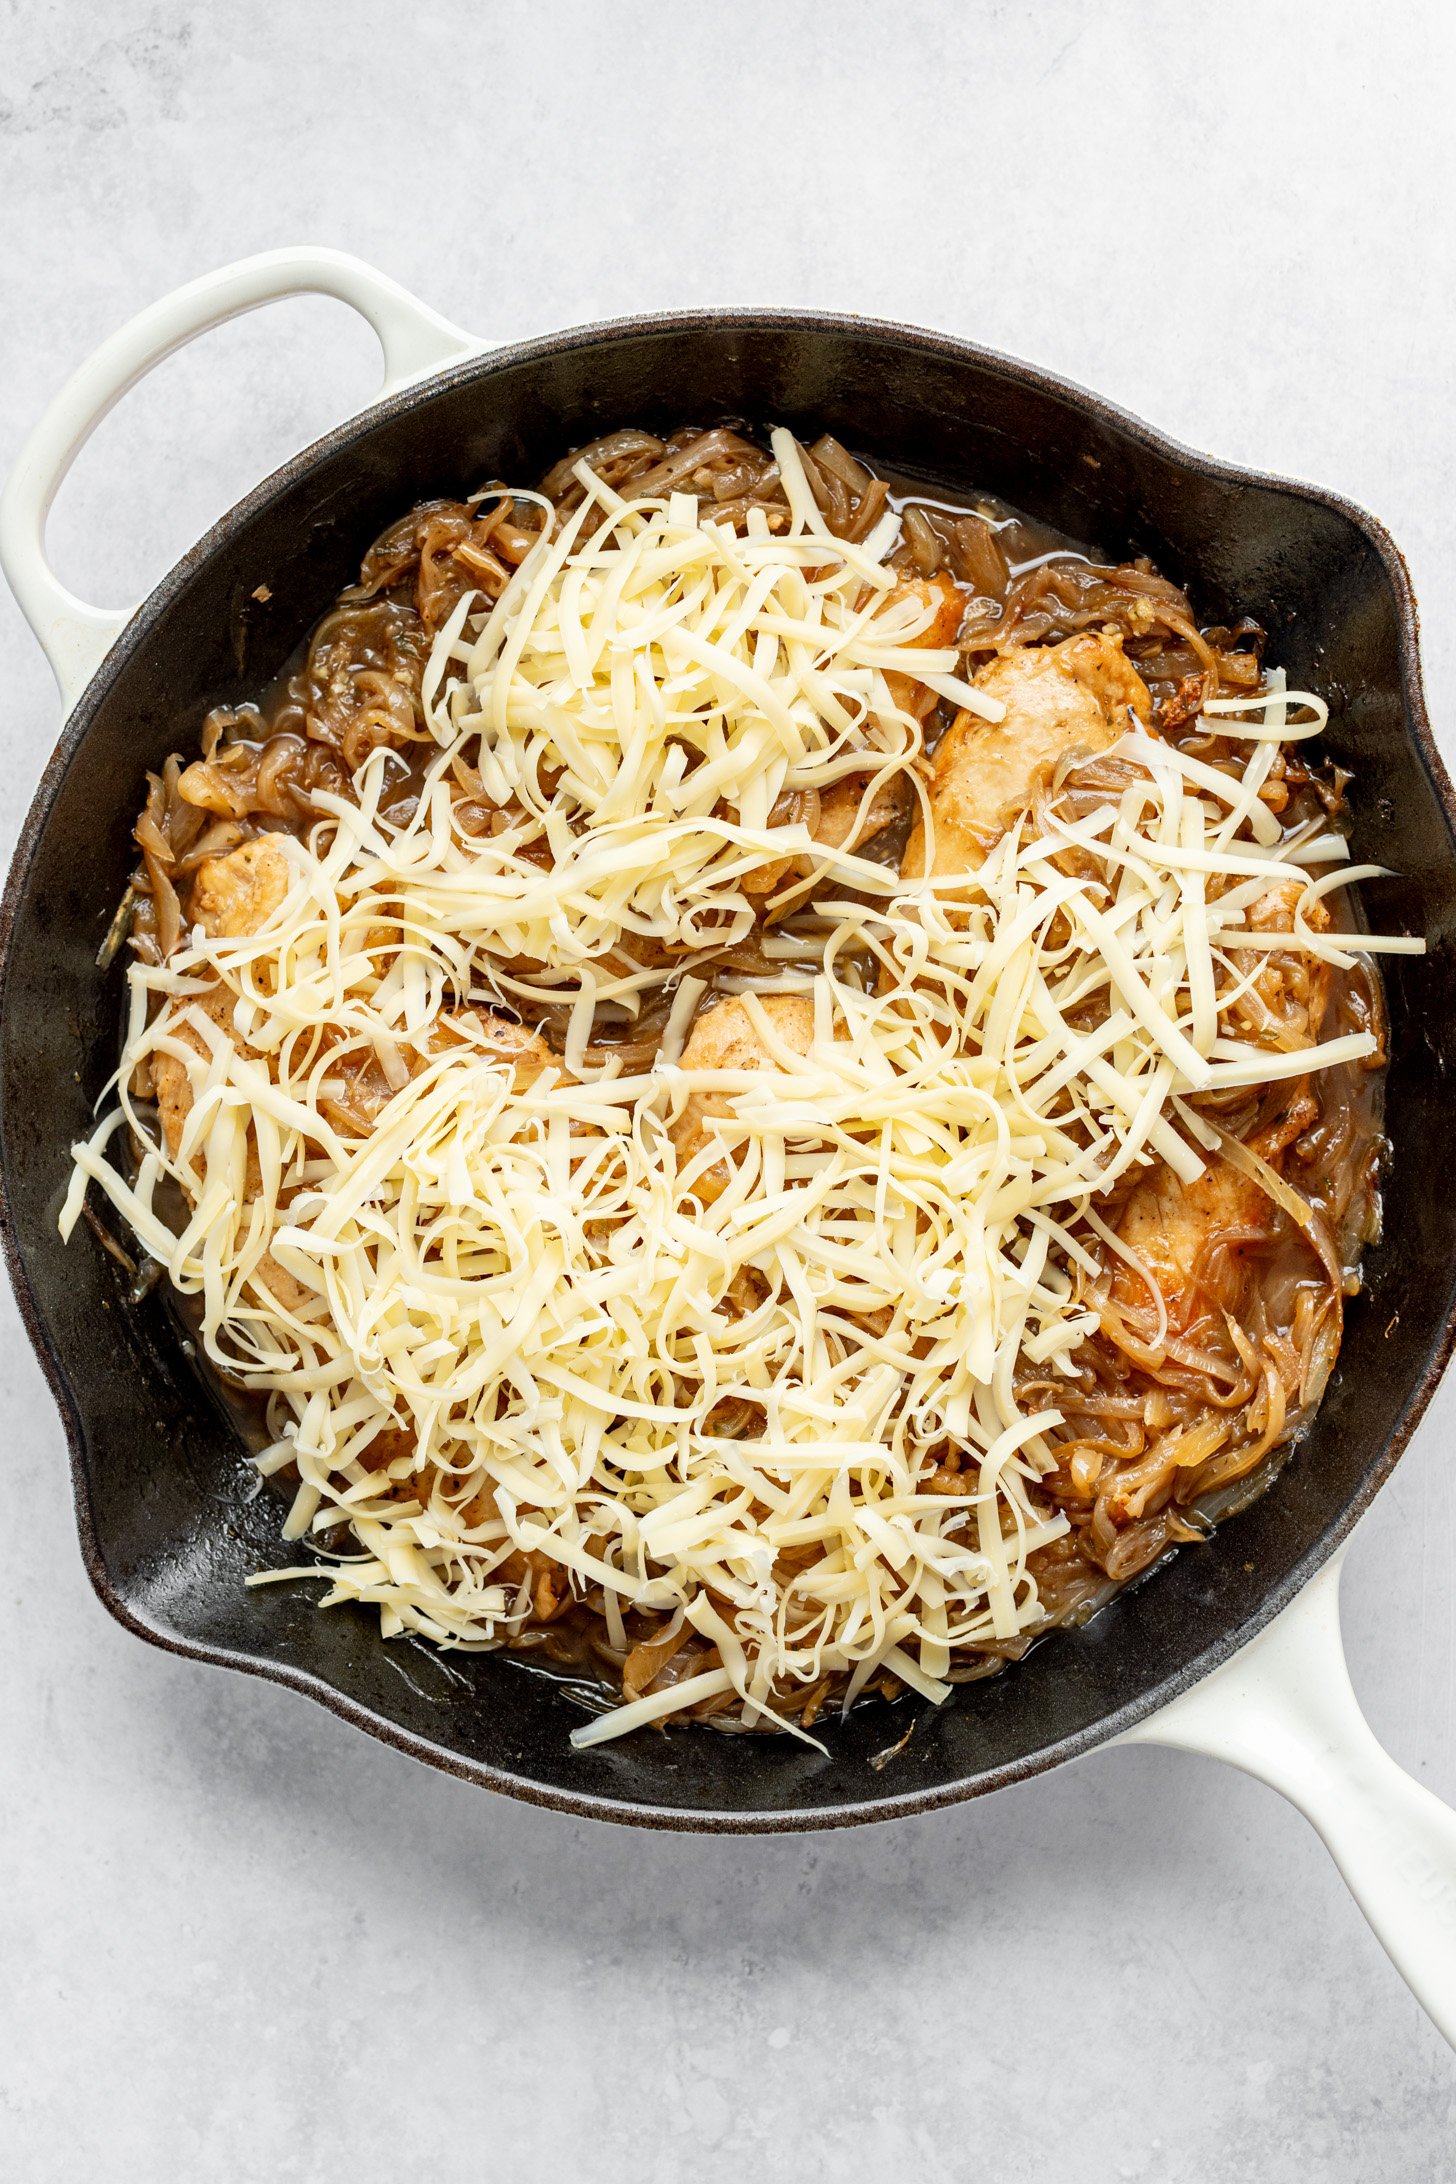 A cast iron skillet filled with caramelized onions, cooked chicken breast and topped with shredded cheese (not yet melted). The skillet is sitting on a countertop.